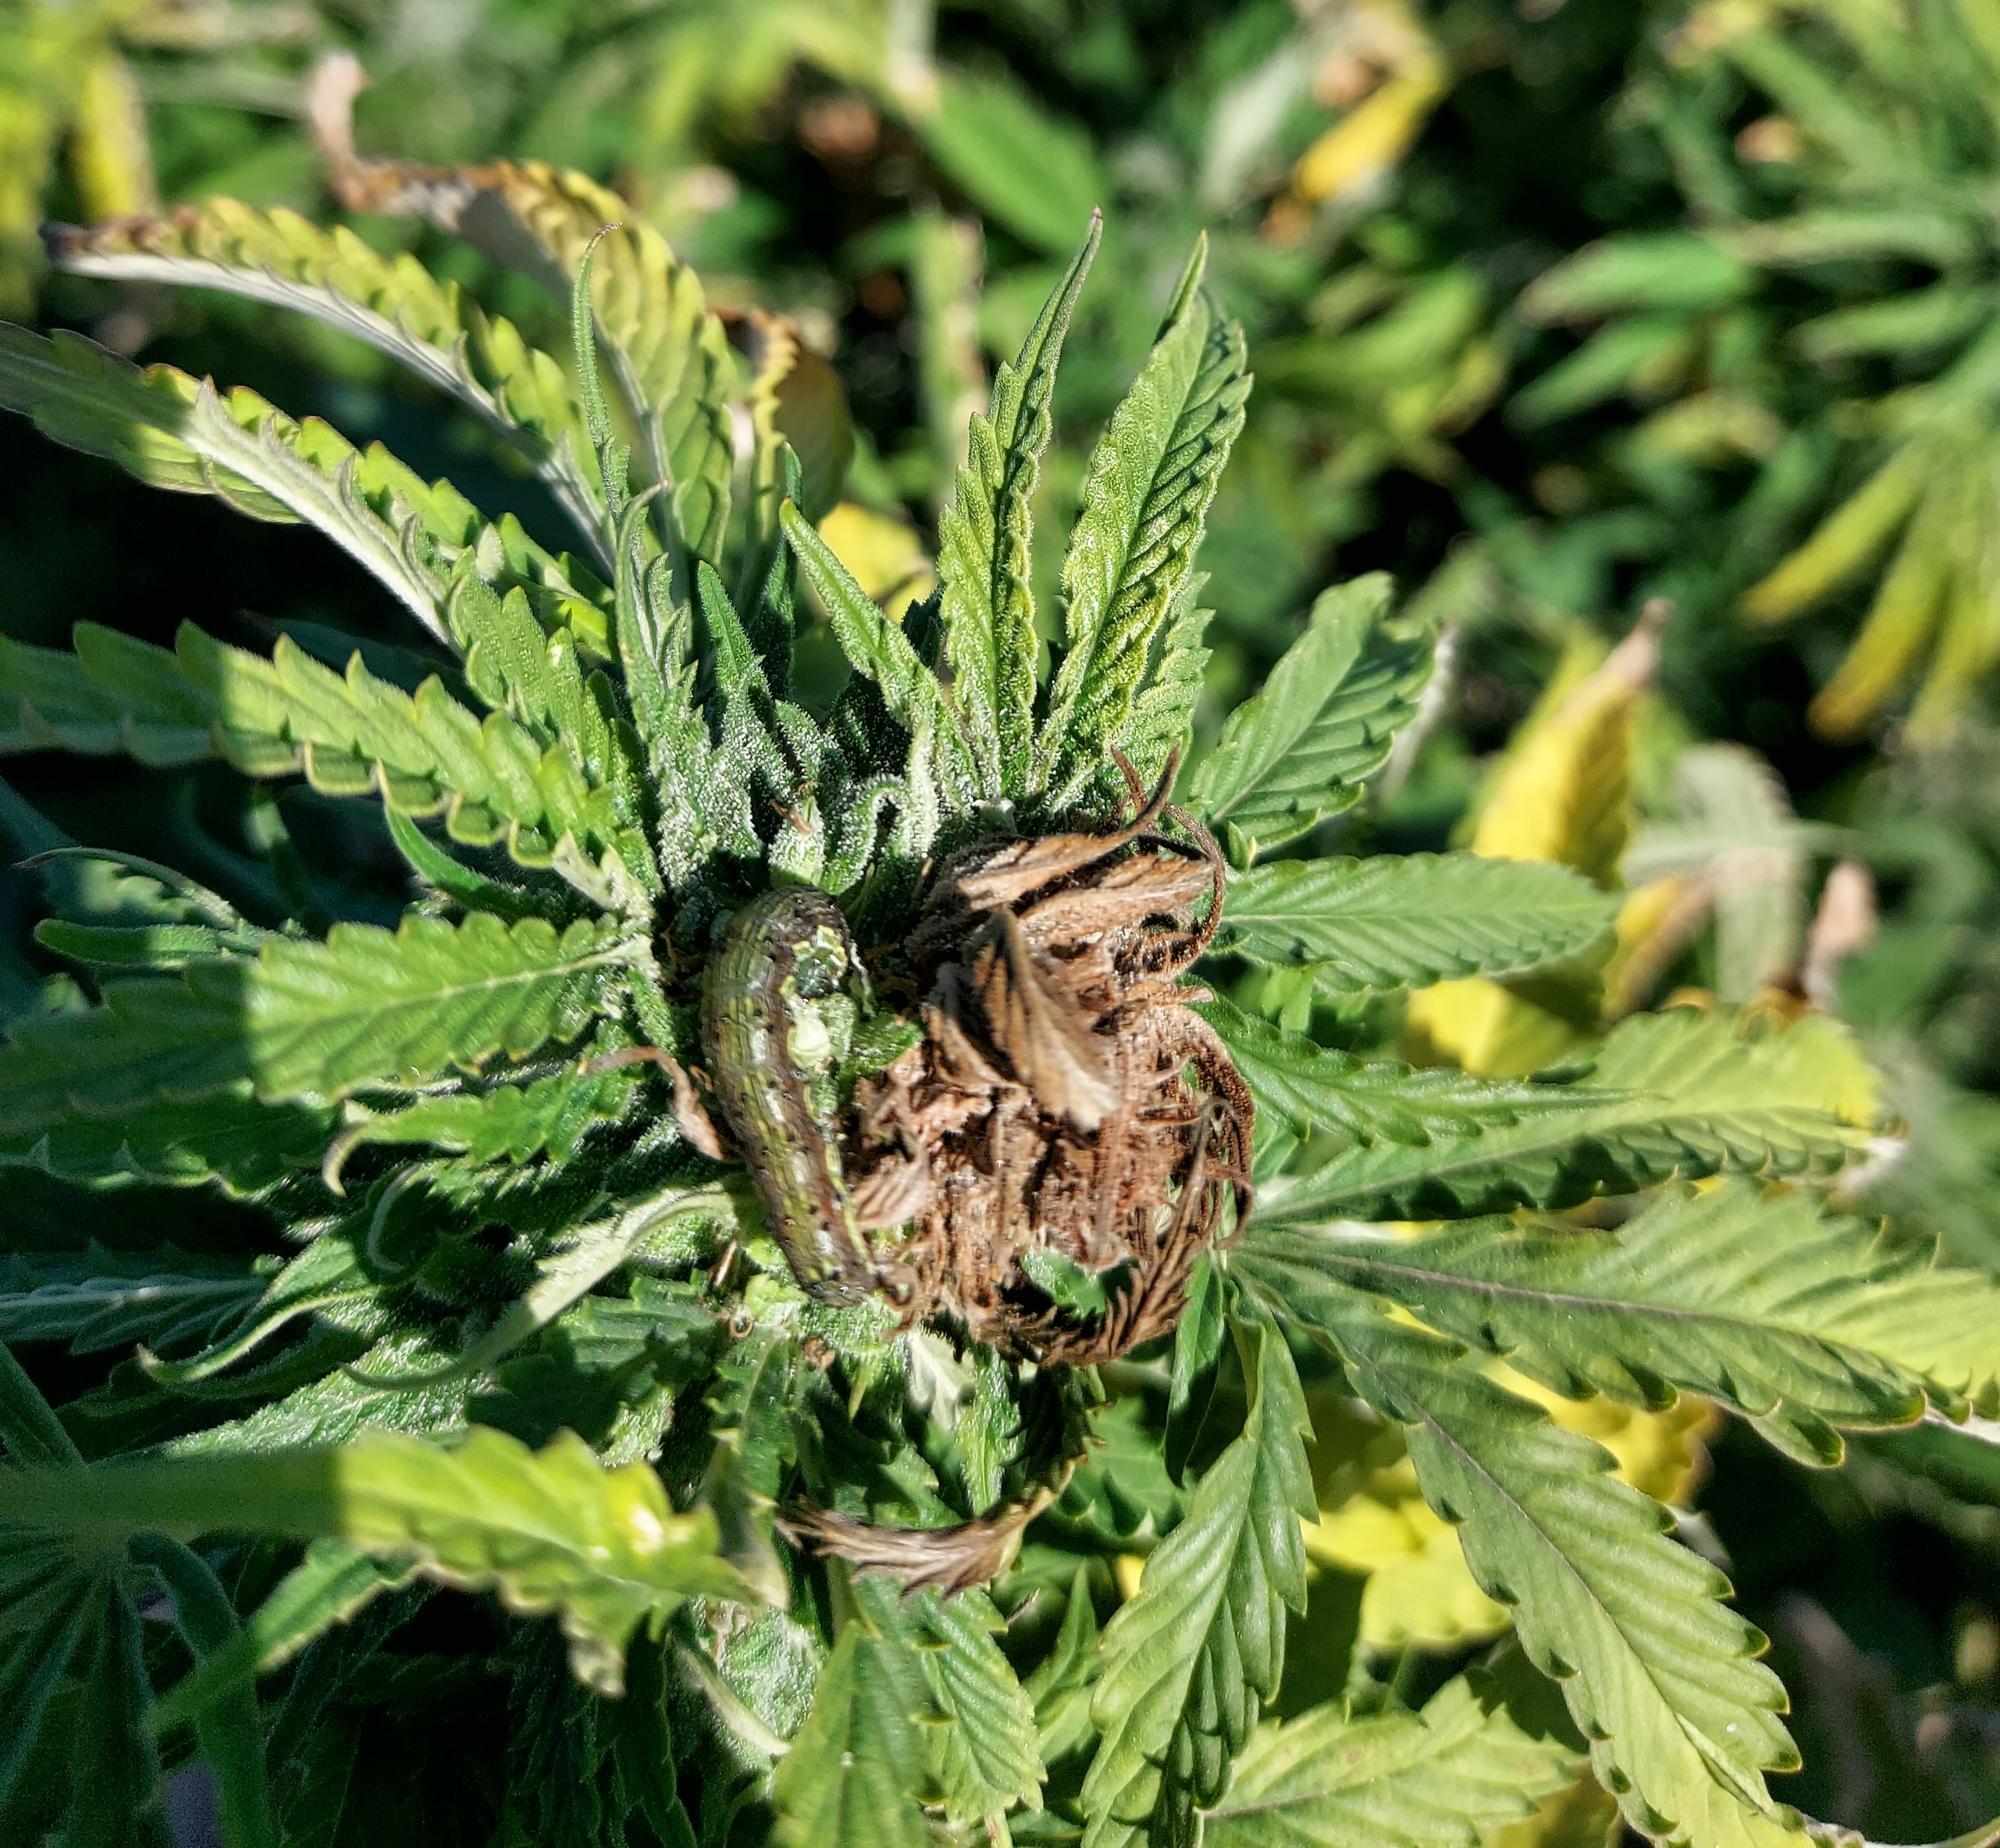 A corn earworm is shown on a hemp bud as well as damage it has inflicted.in the form of brown, dead foliage.